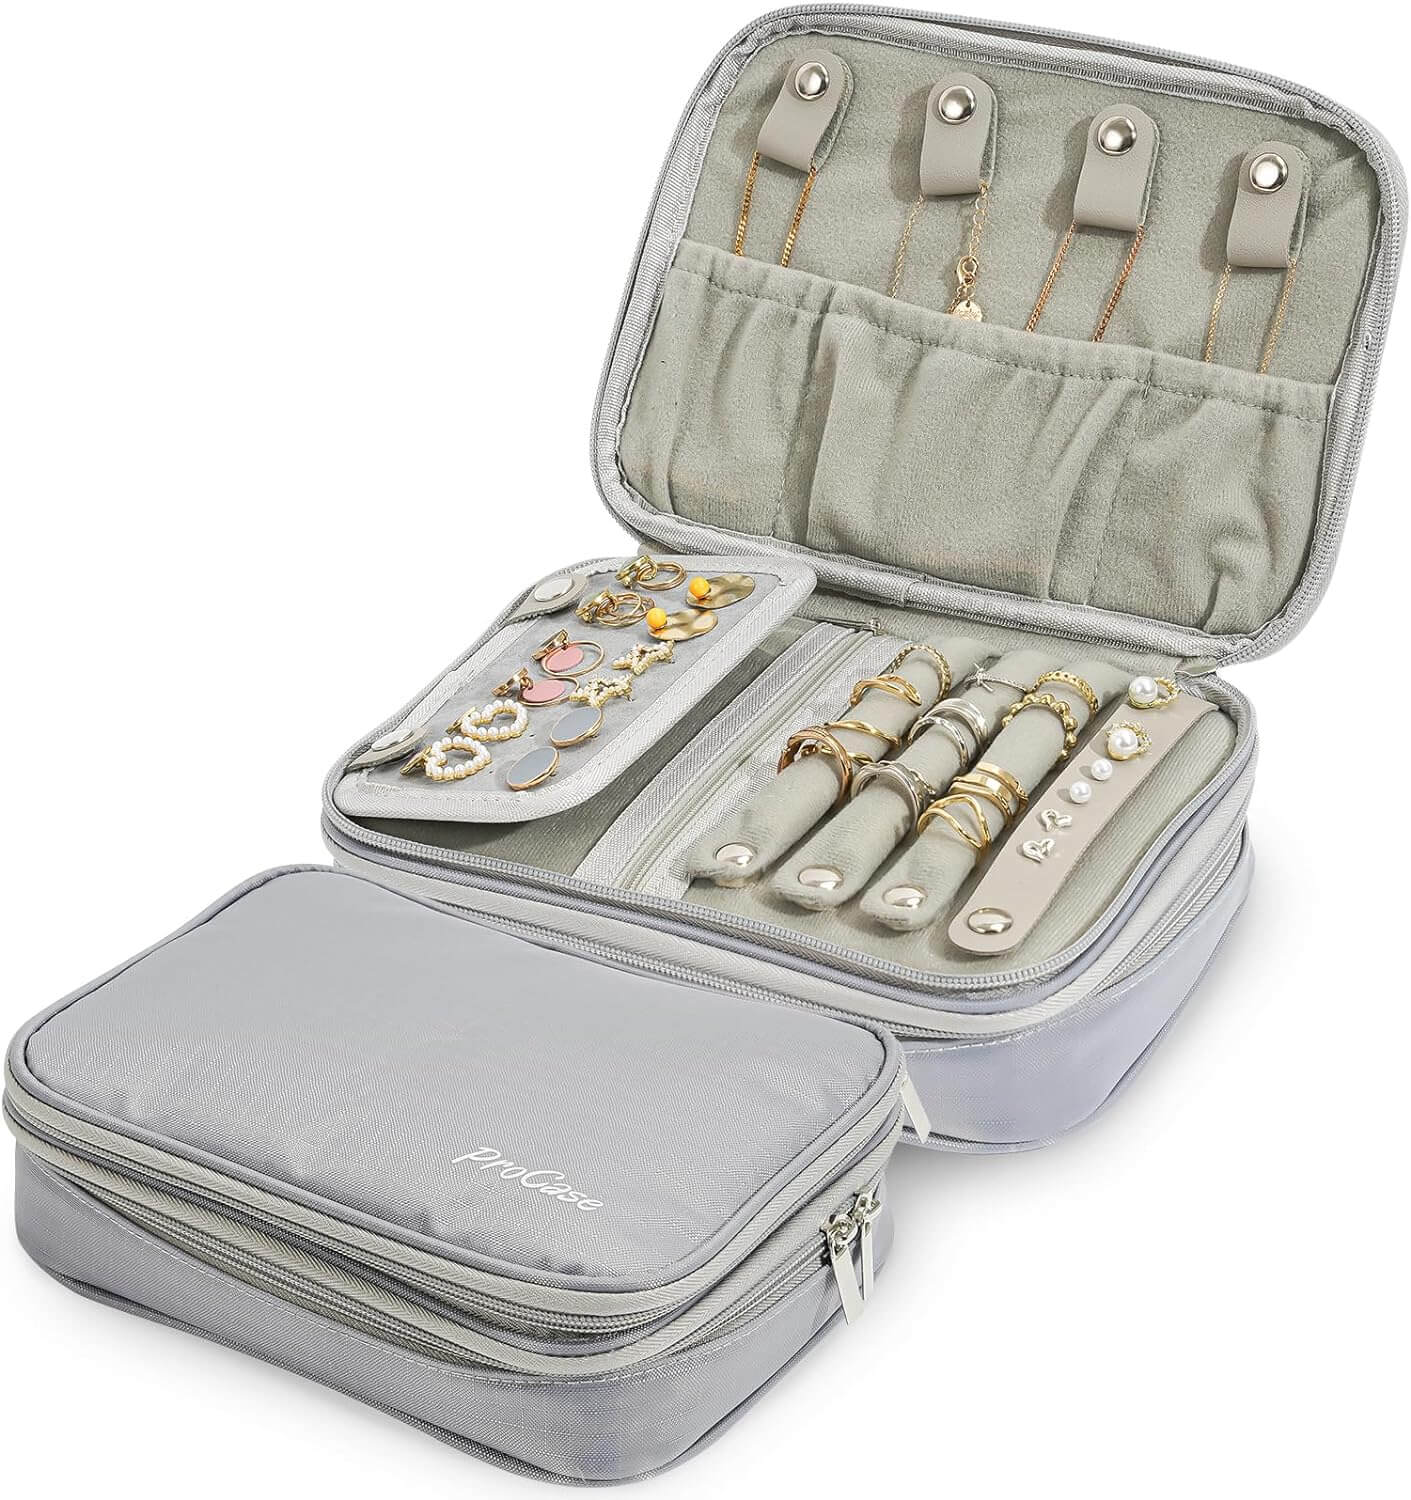 Travel Jewelry Case With Earring Holder, Necklace Organizer, Gold and  Silver Travel Accessory 